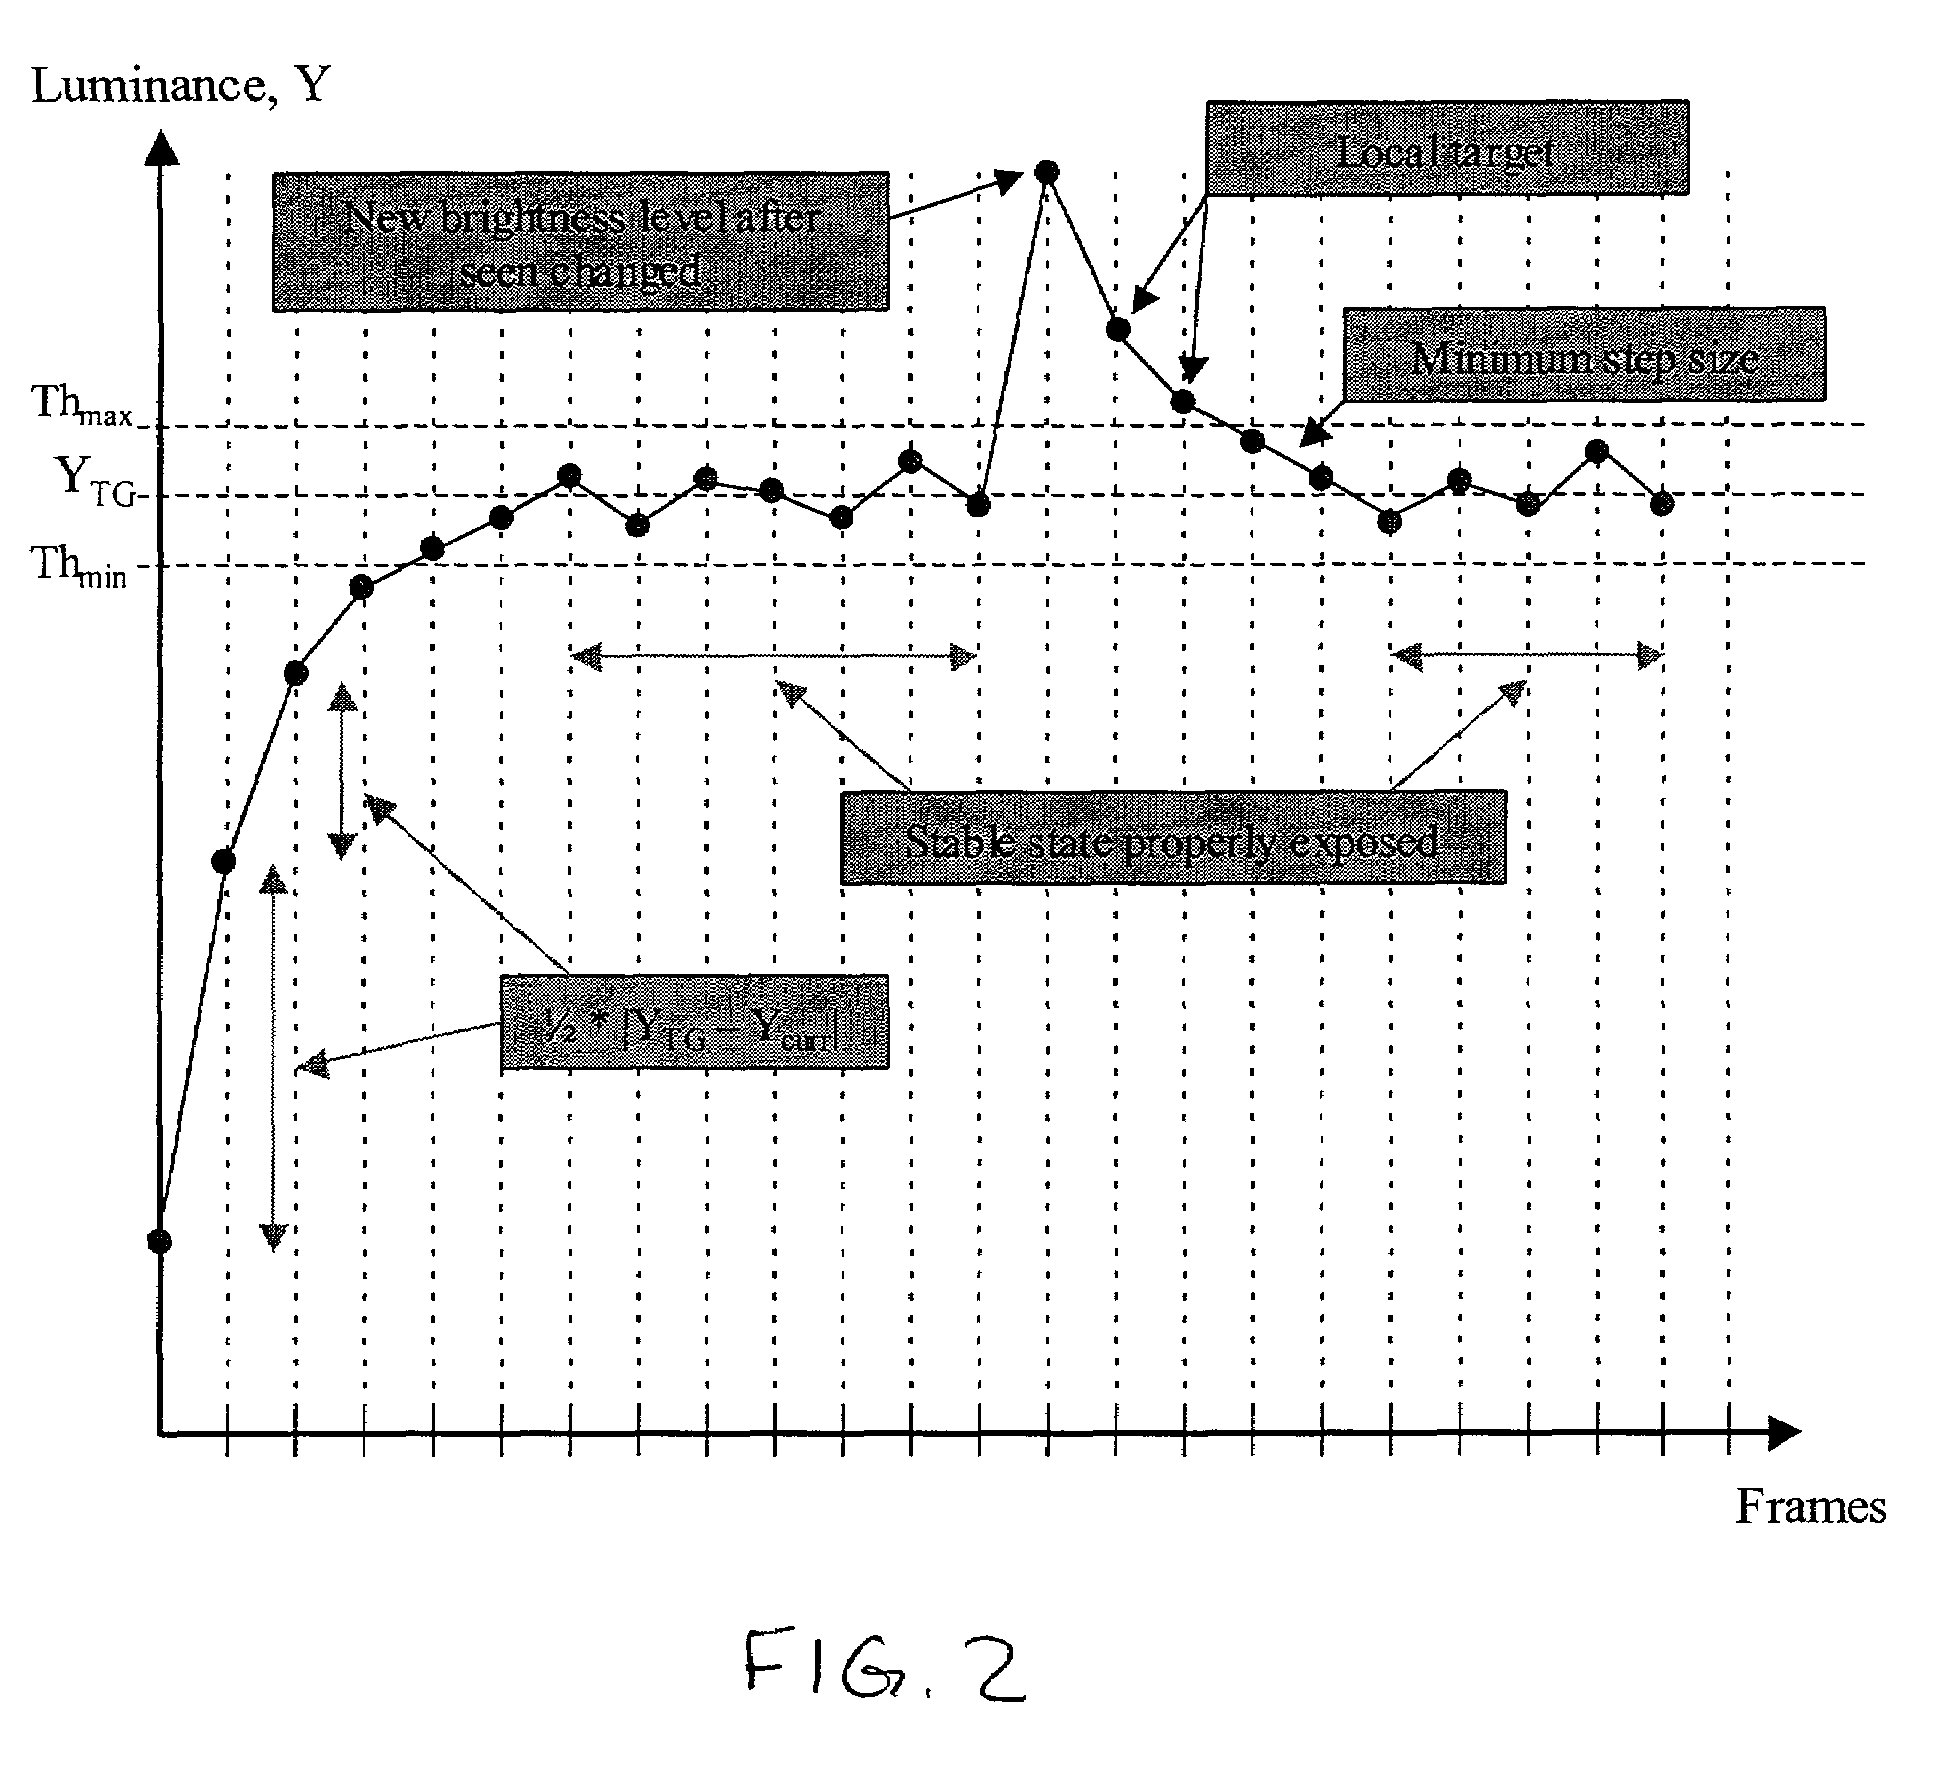 Method and apparatus for automatic gain and exposure control for maintaining target image brightness in video imager systems